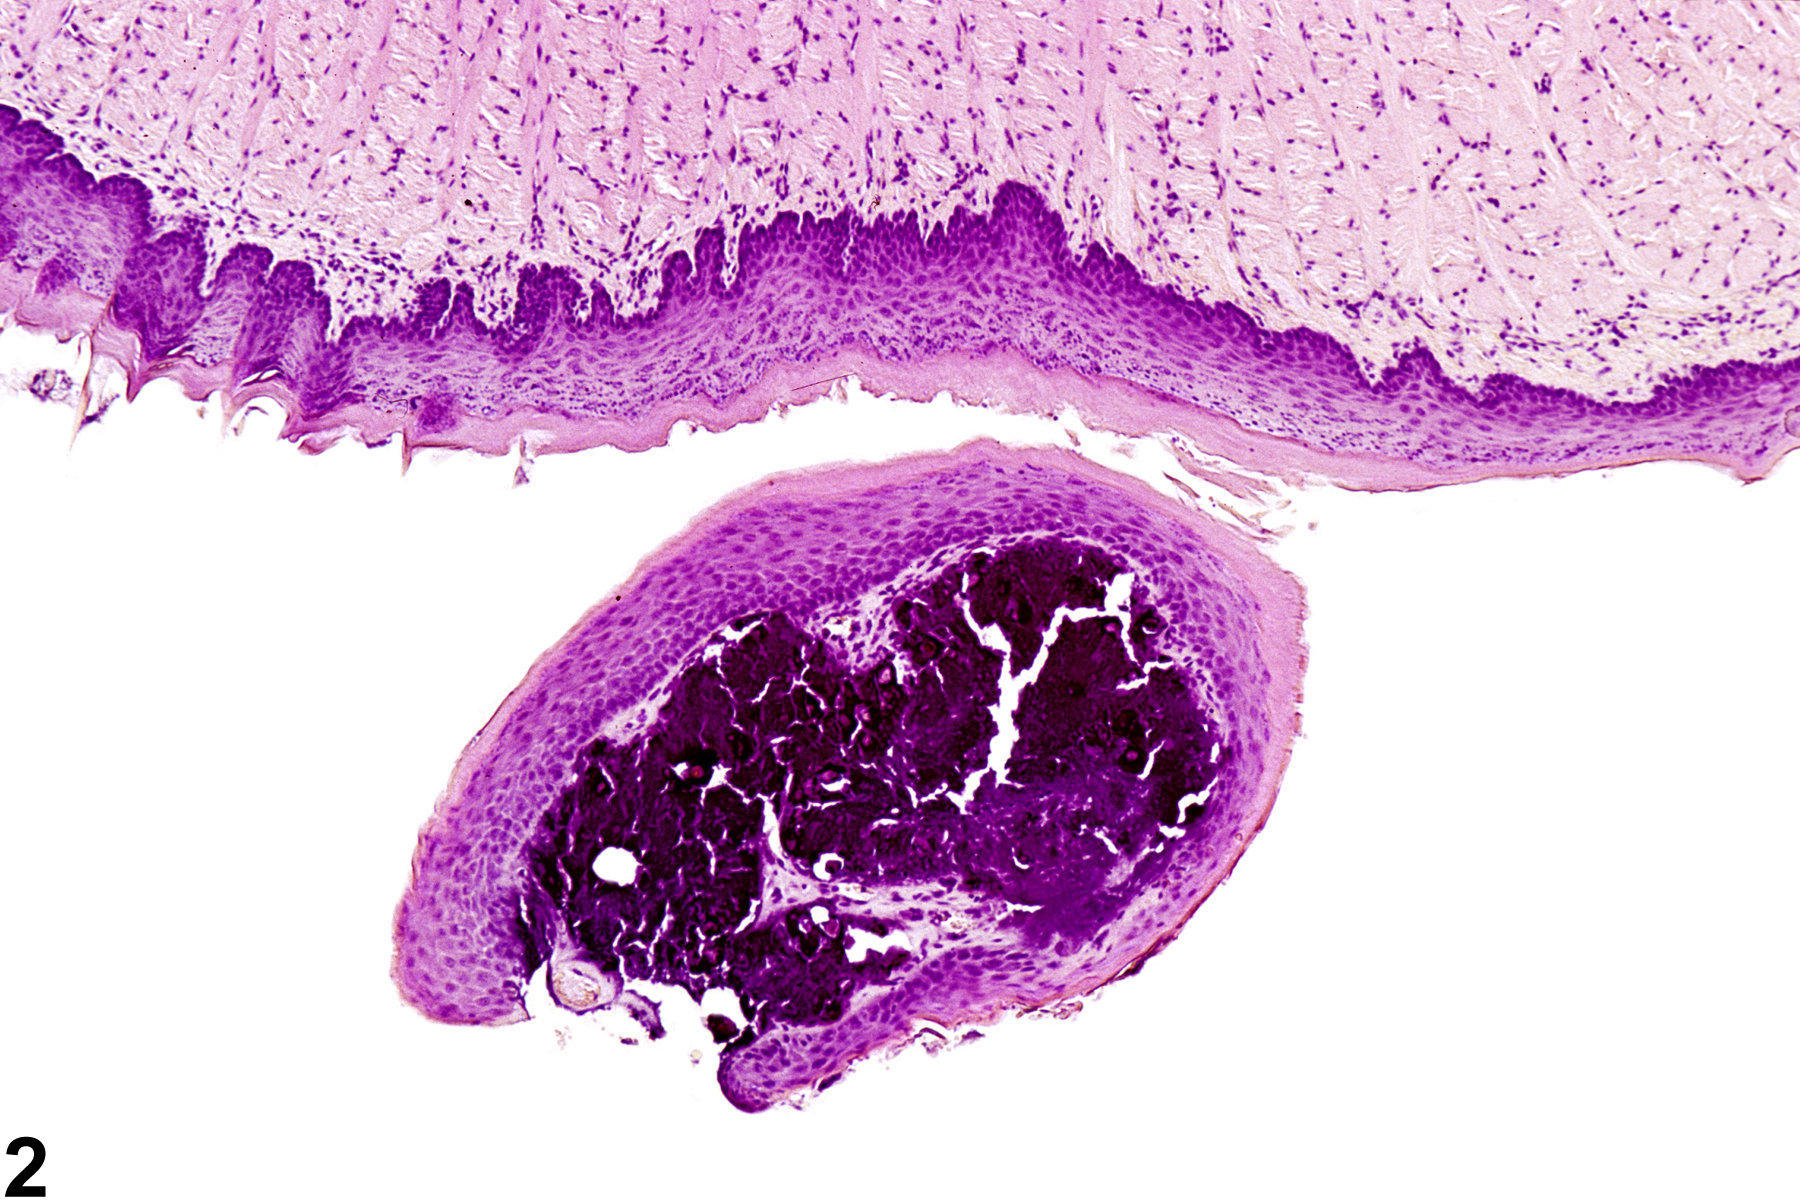 Image of fibroepithelial polyp in the tongue mucosa from a male B6C3F1 mouse in a chronic study